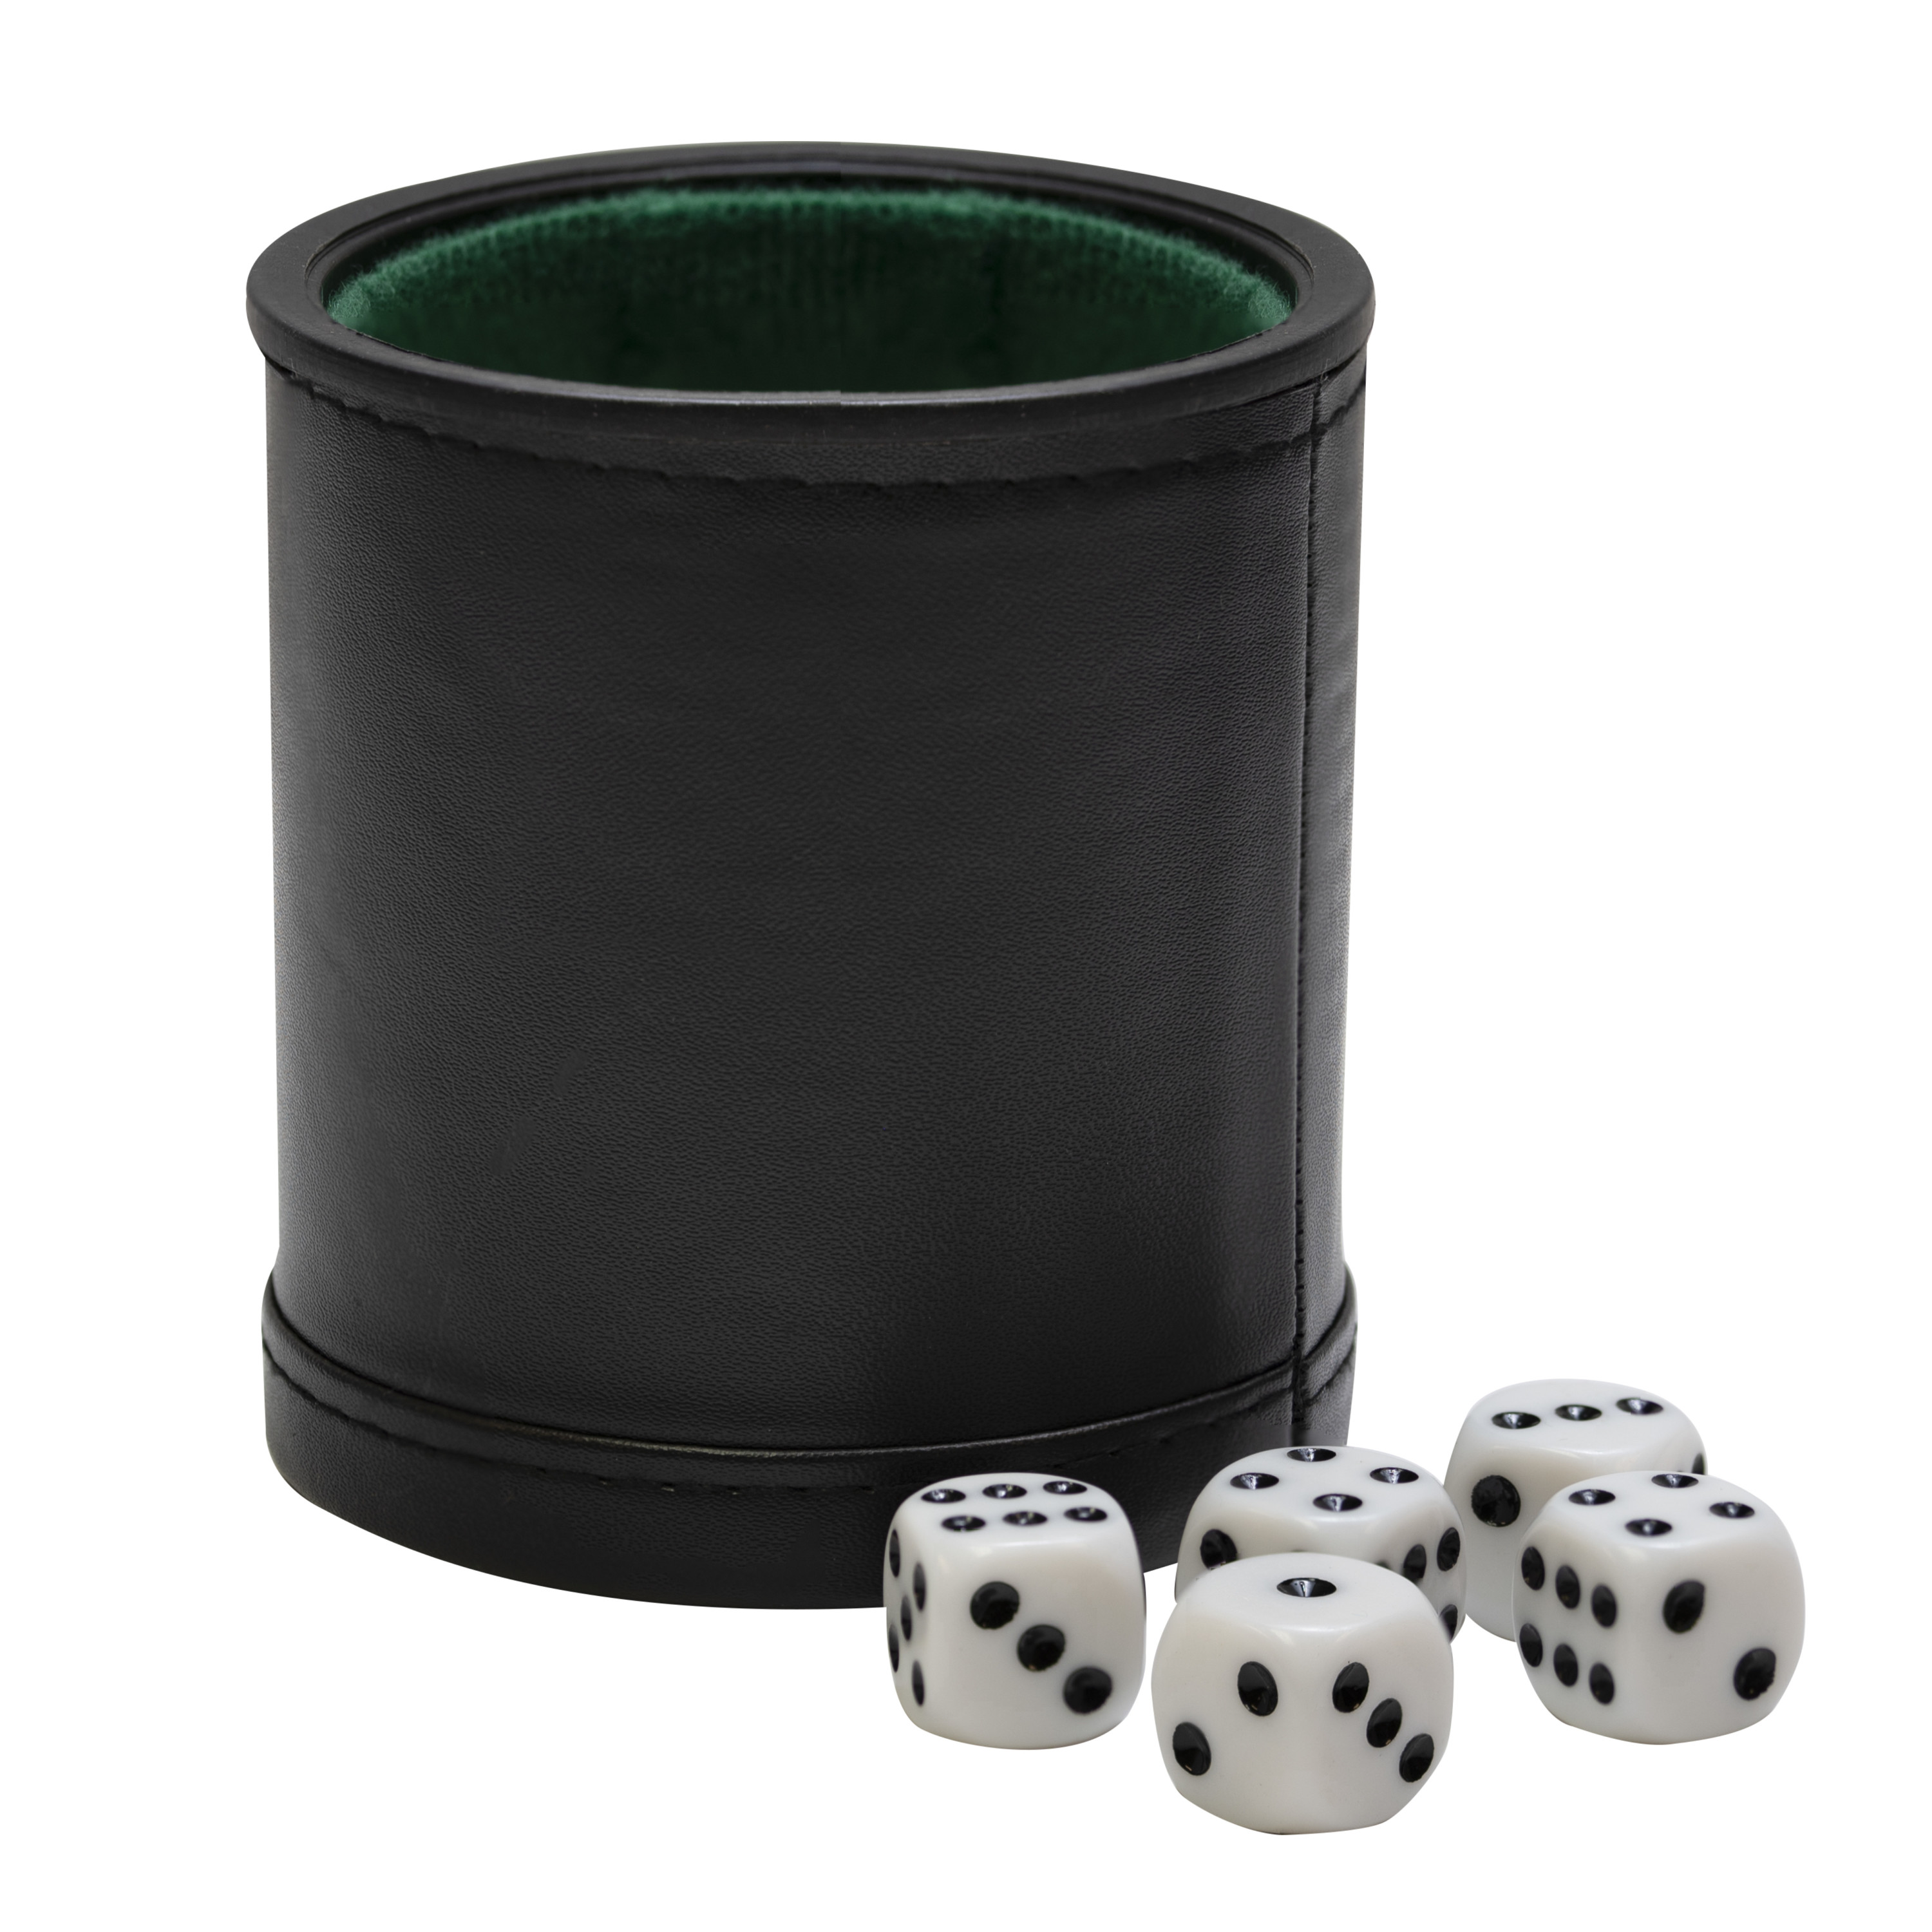 Fat Cat 500Ct Texas Hold'Em Dice Poker Chip Set, Fat Cat Four Deck Card Shoe, and Fat Cat Dice Cup & Dice - image 4 of 4